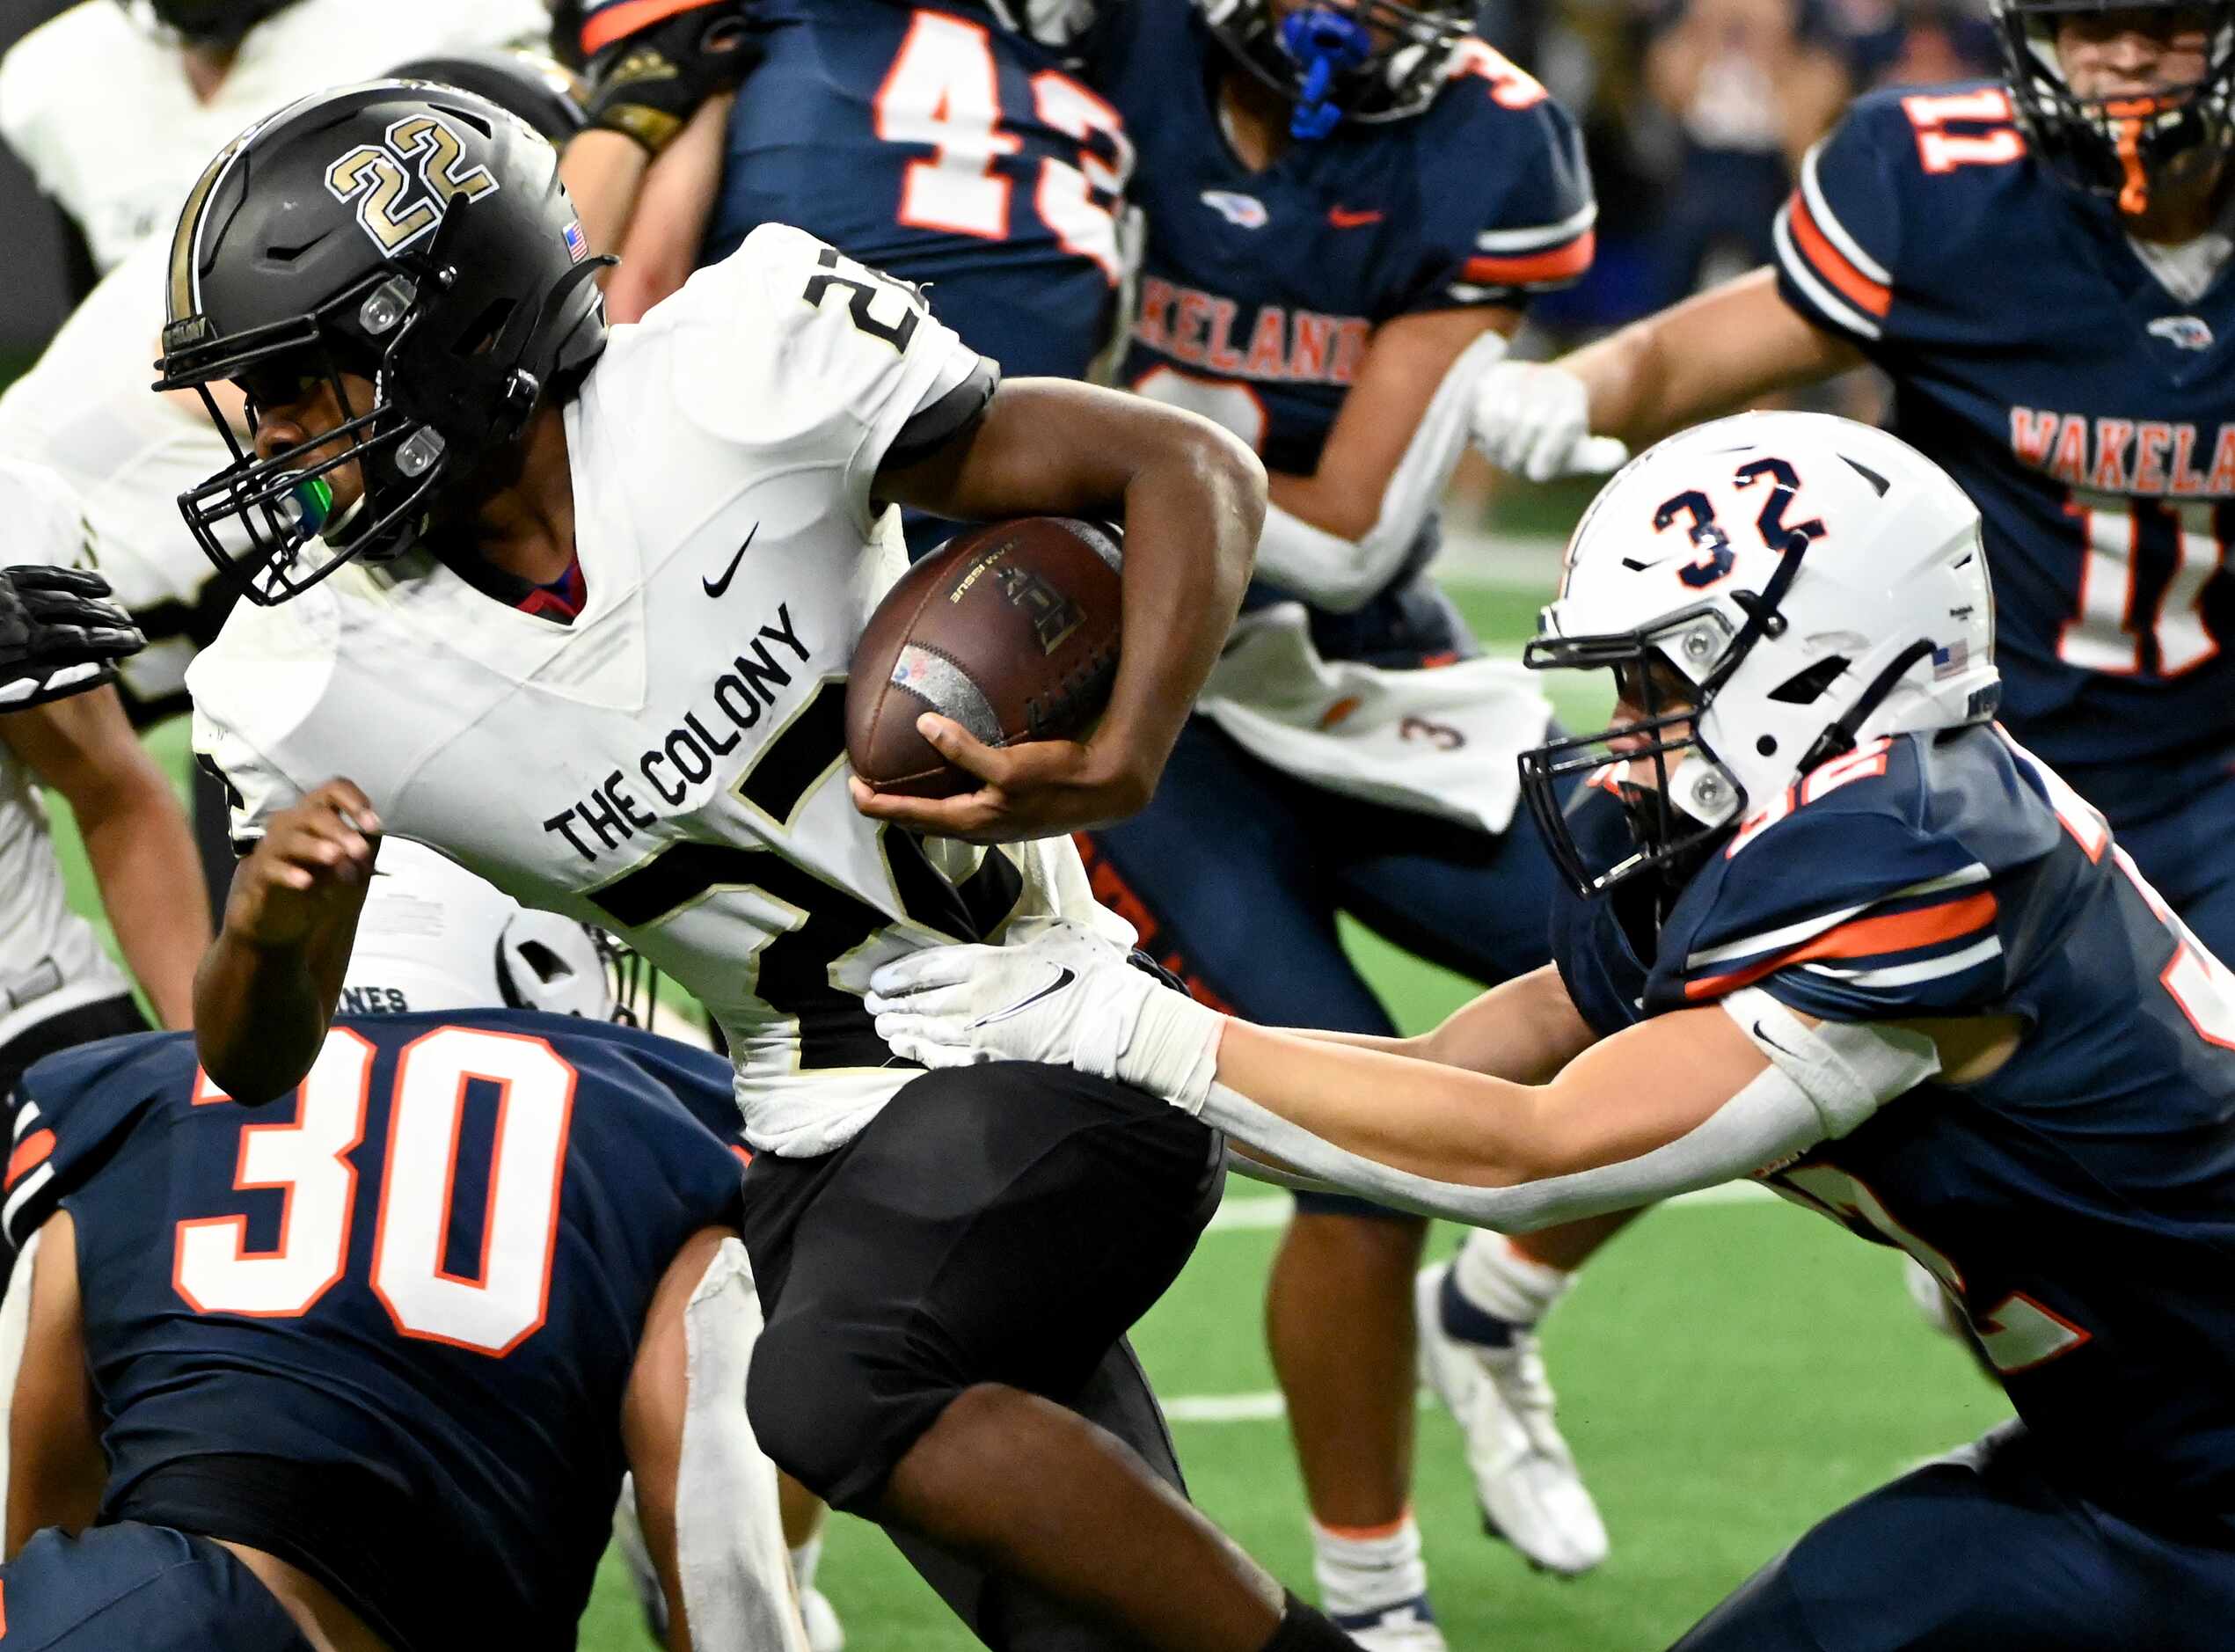 The Colony's Dylan Sneed (22) tries to run through a tackle attempt by Frisco Wakeland's...